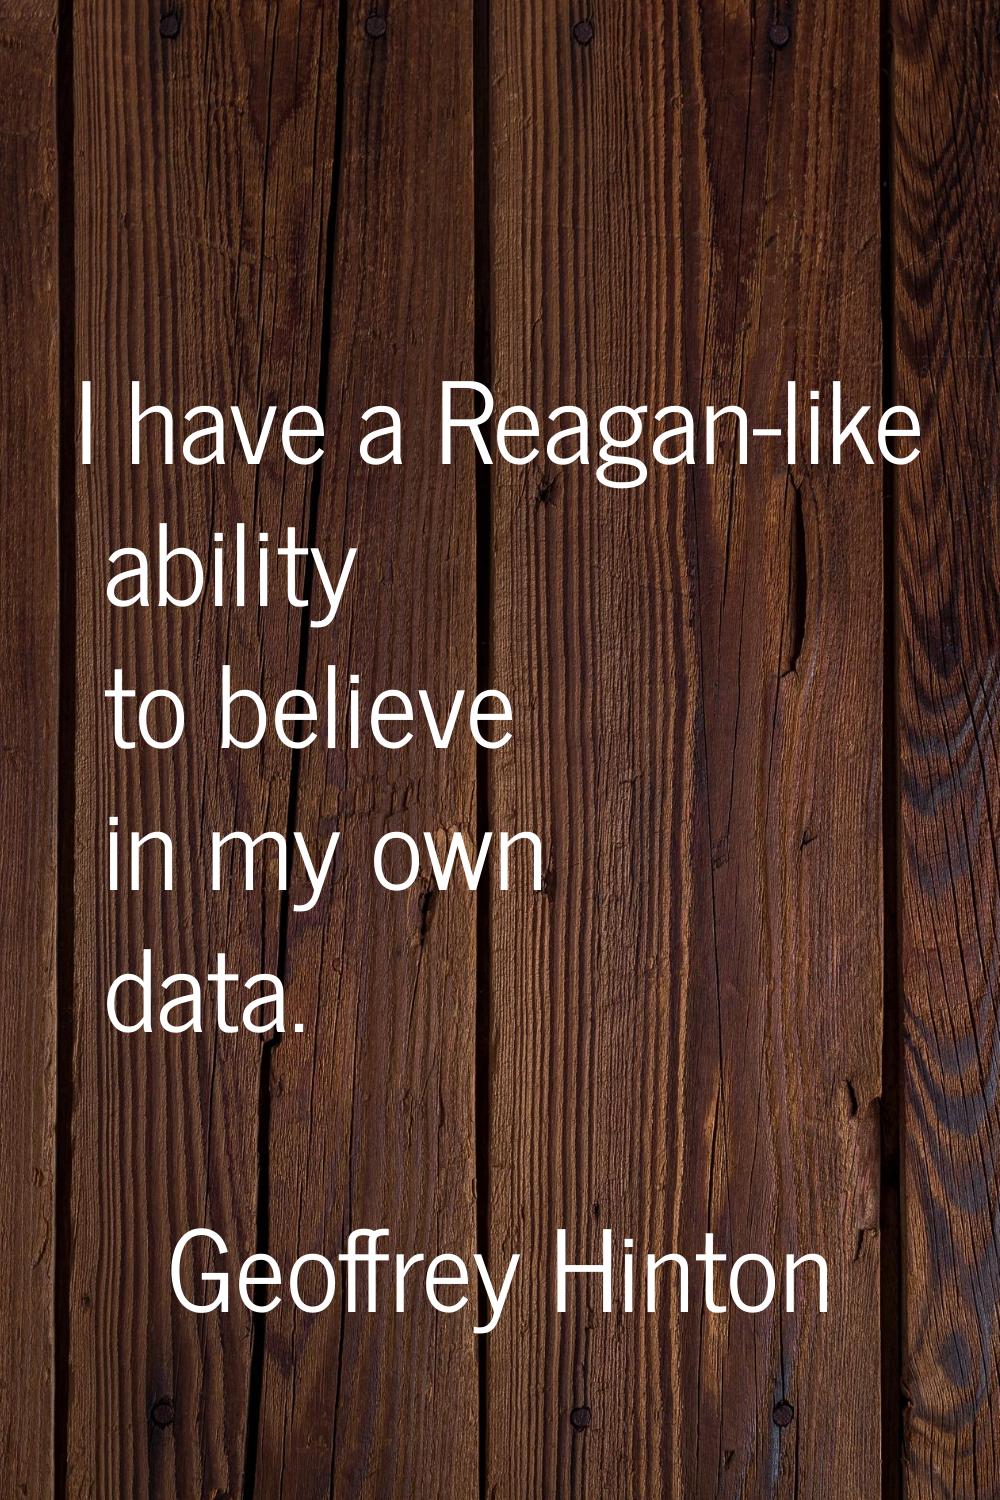 I have a Reagan-like ability to believe in my own data.